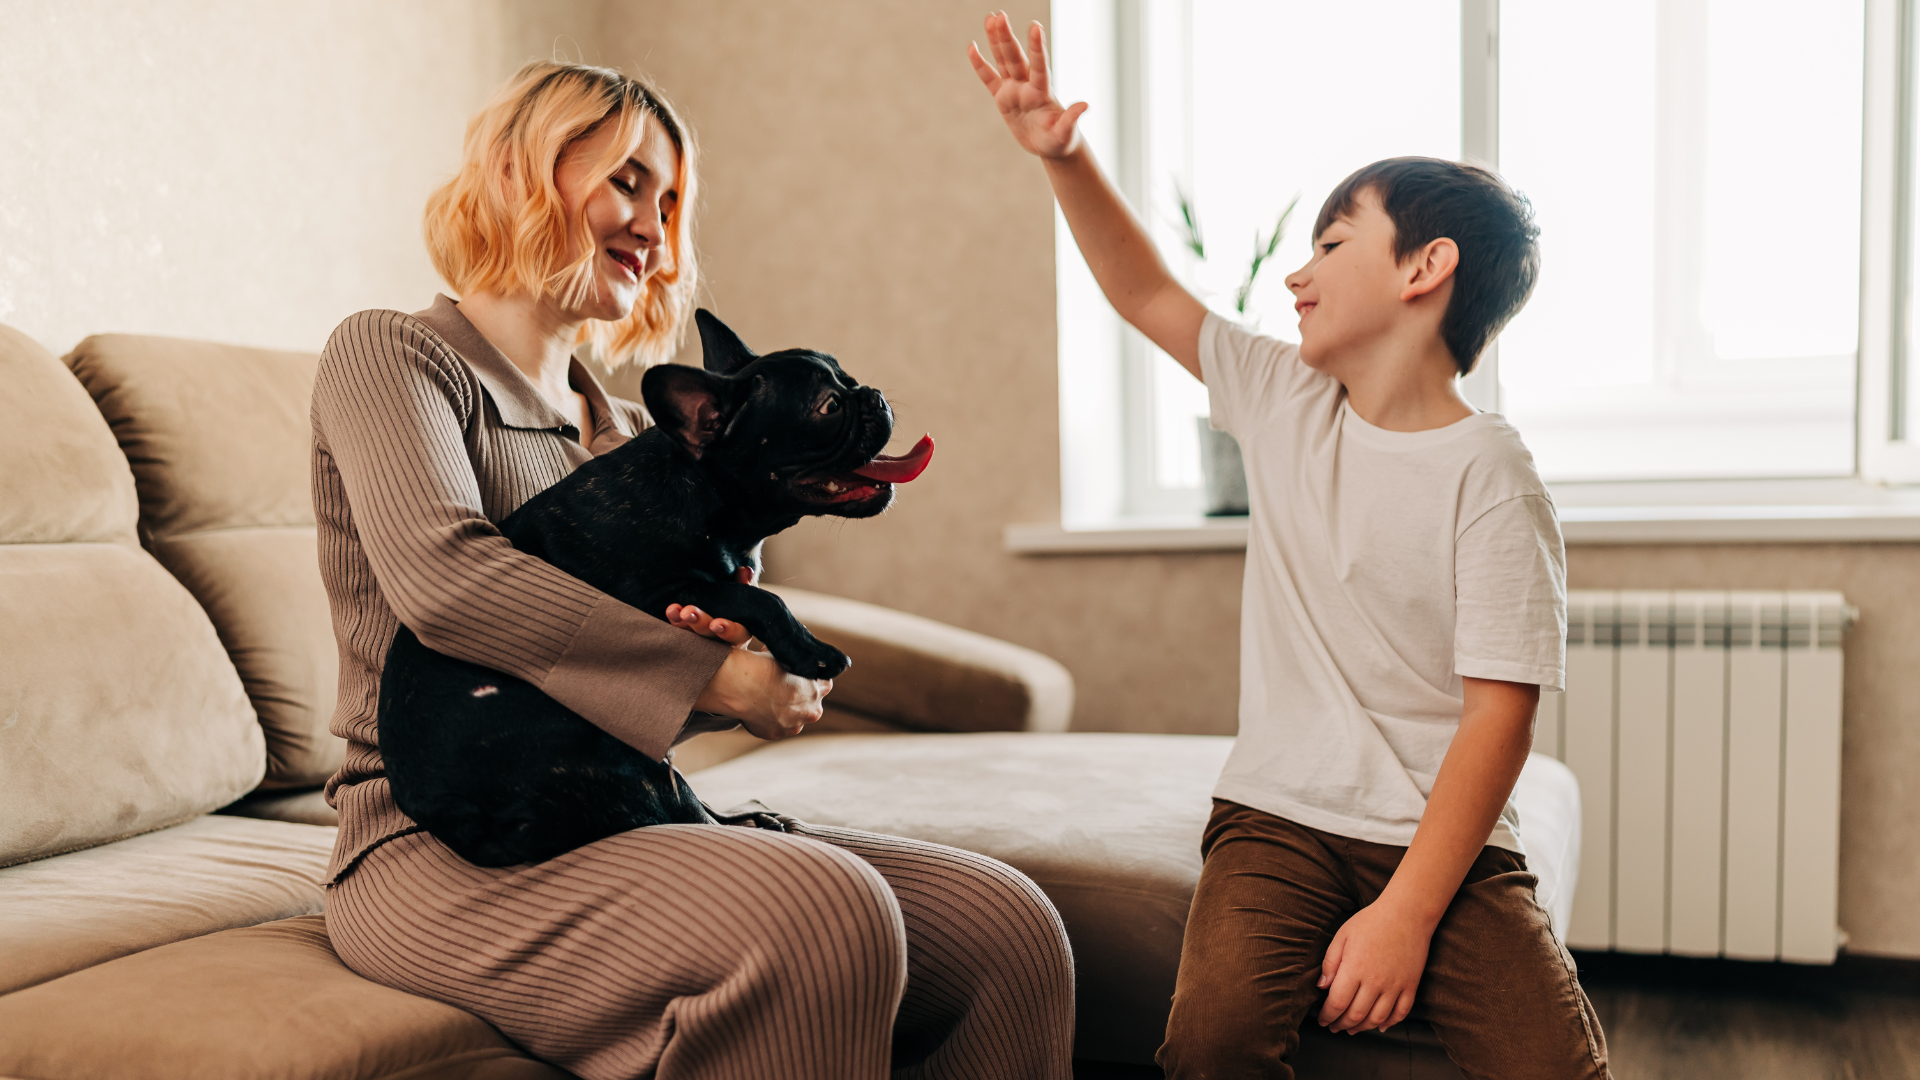 Dog Mom's Guide to Juggling Parenting and Pet Ownership